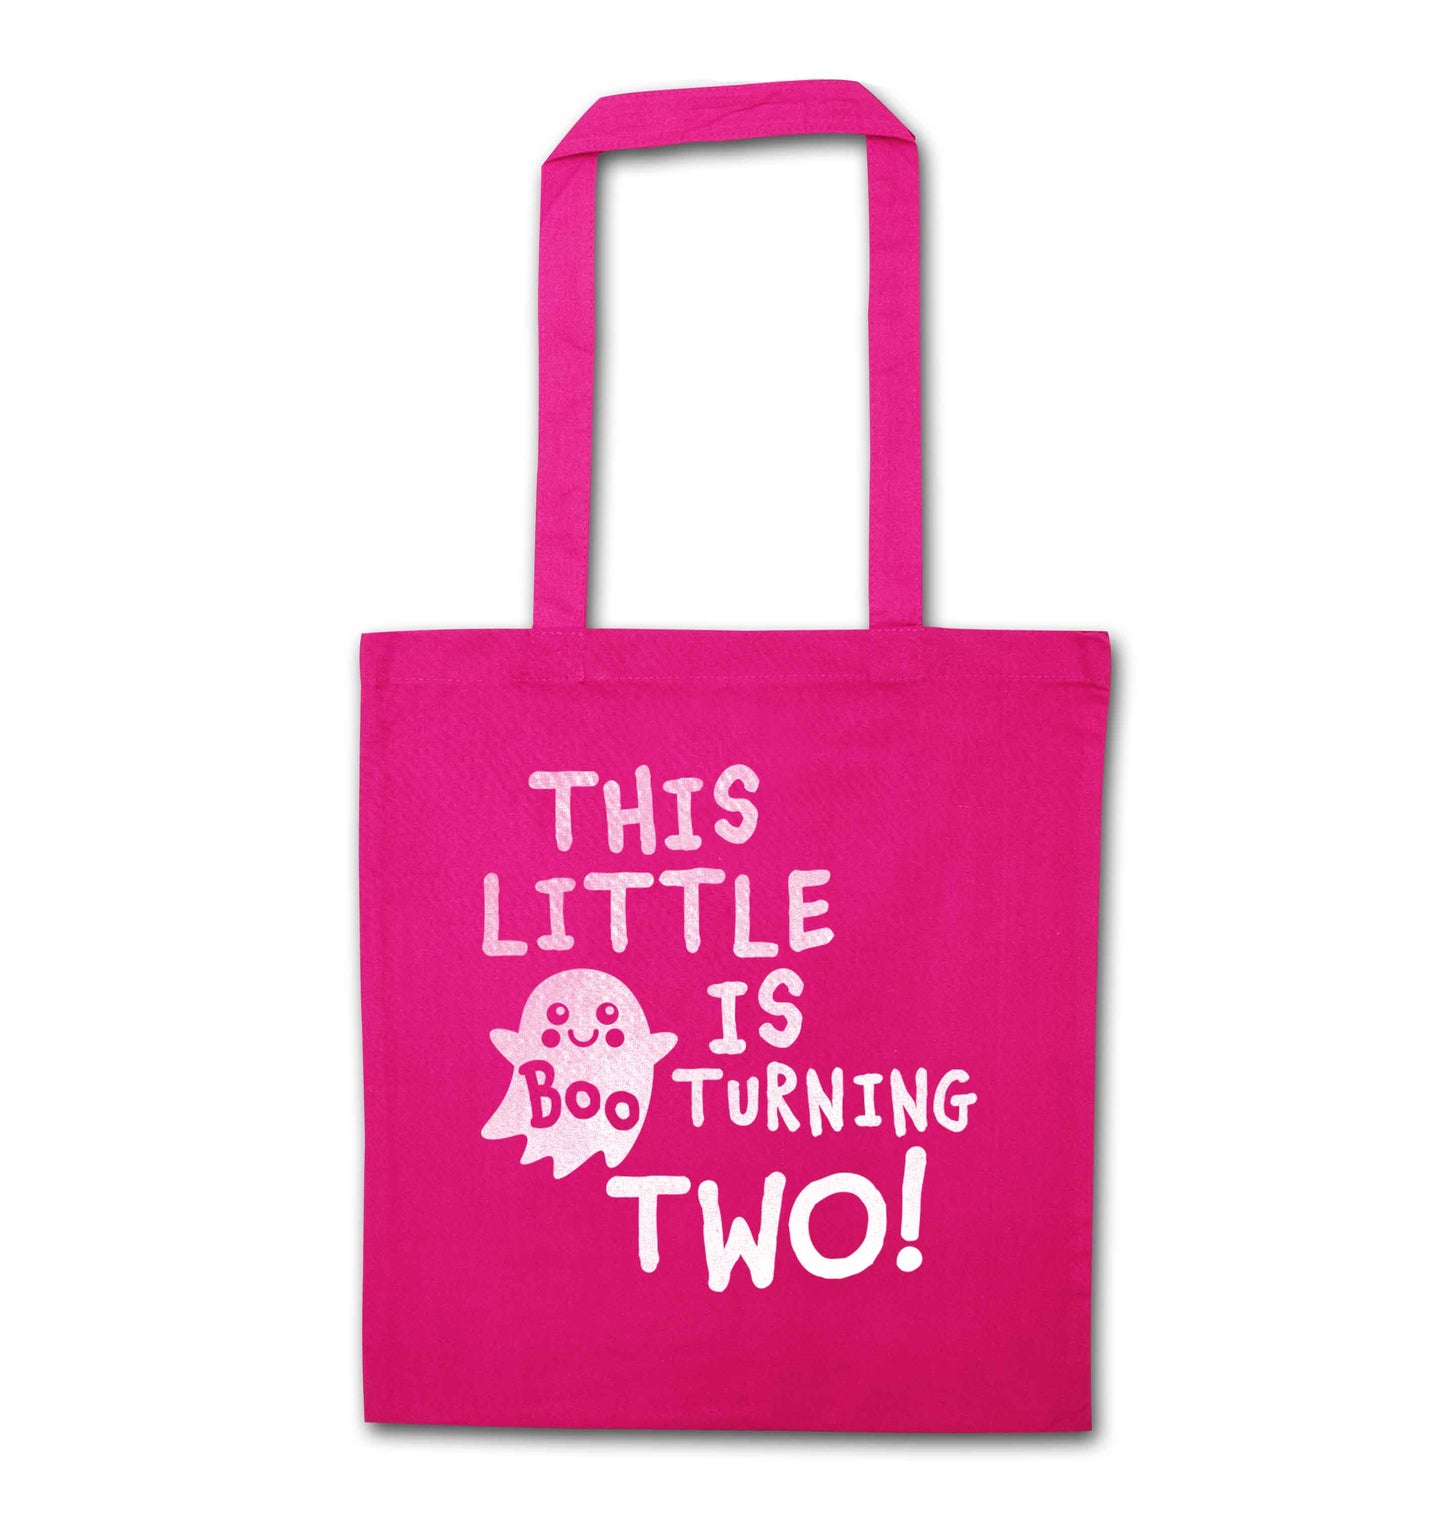 This little boo is turning two pink tote bag